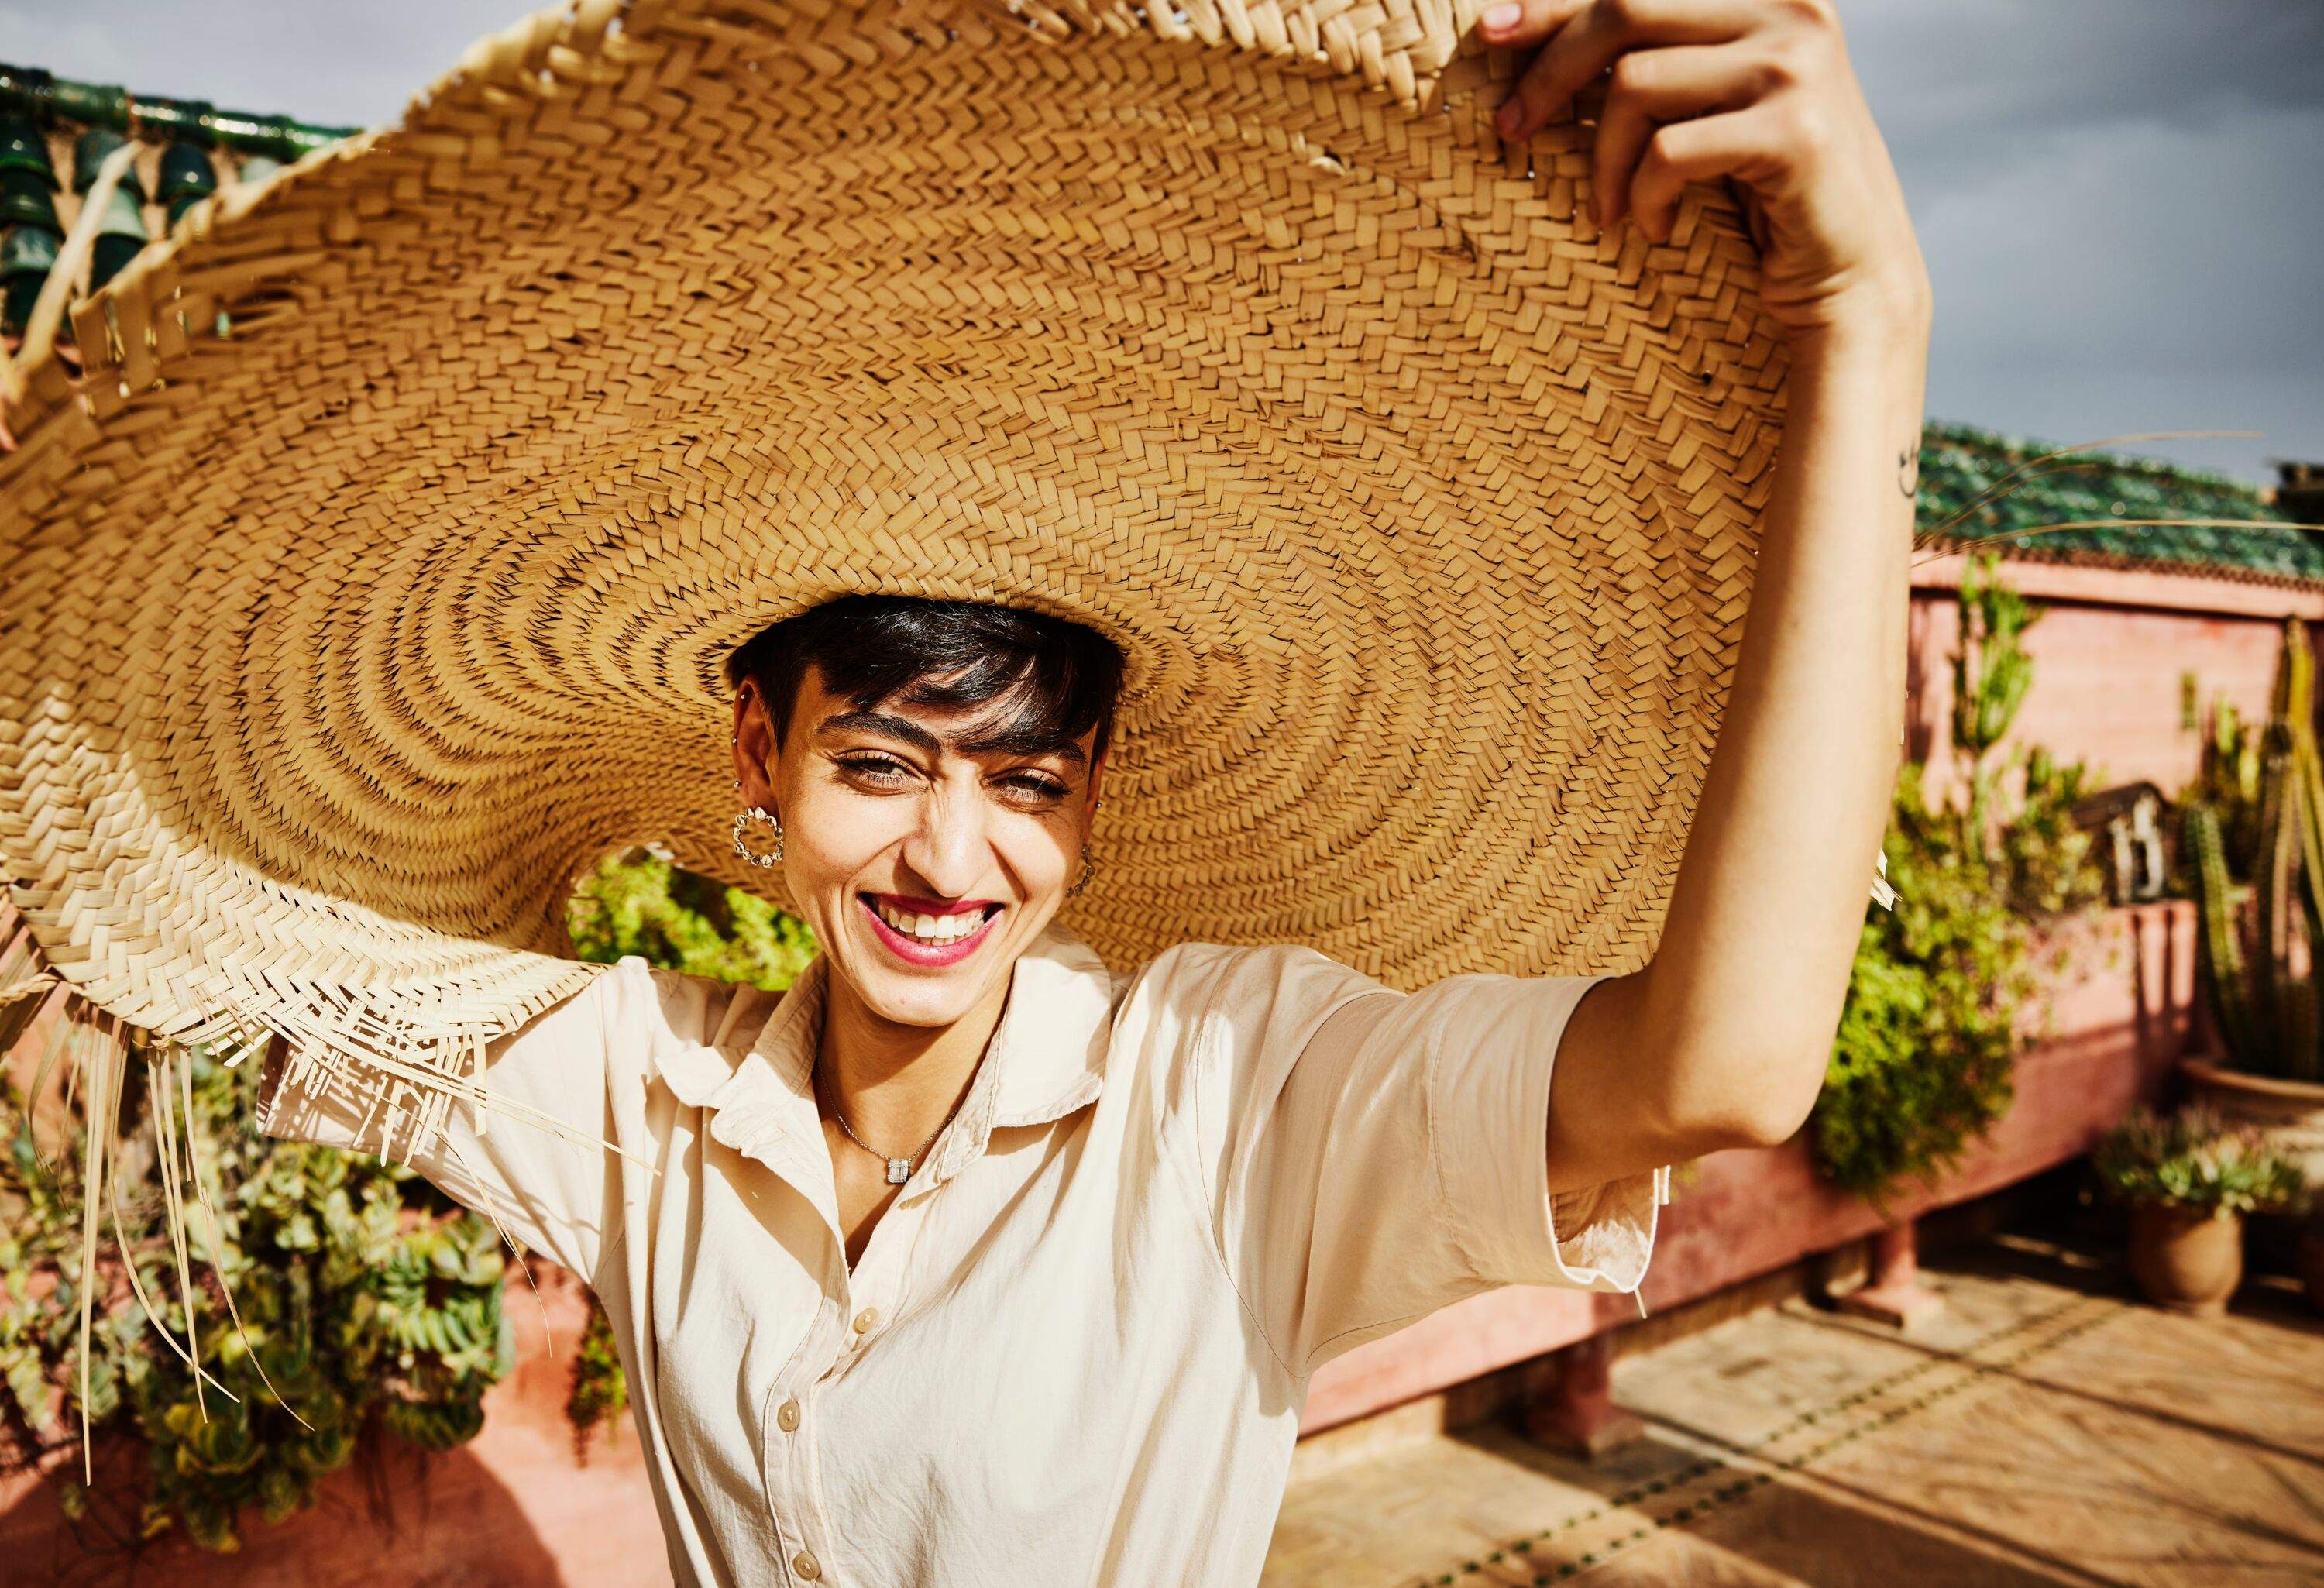 Medium shot portrait of smiling woman wearing large sunhat on rooftop of riad while on vacation in Marrakech